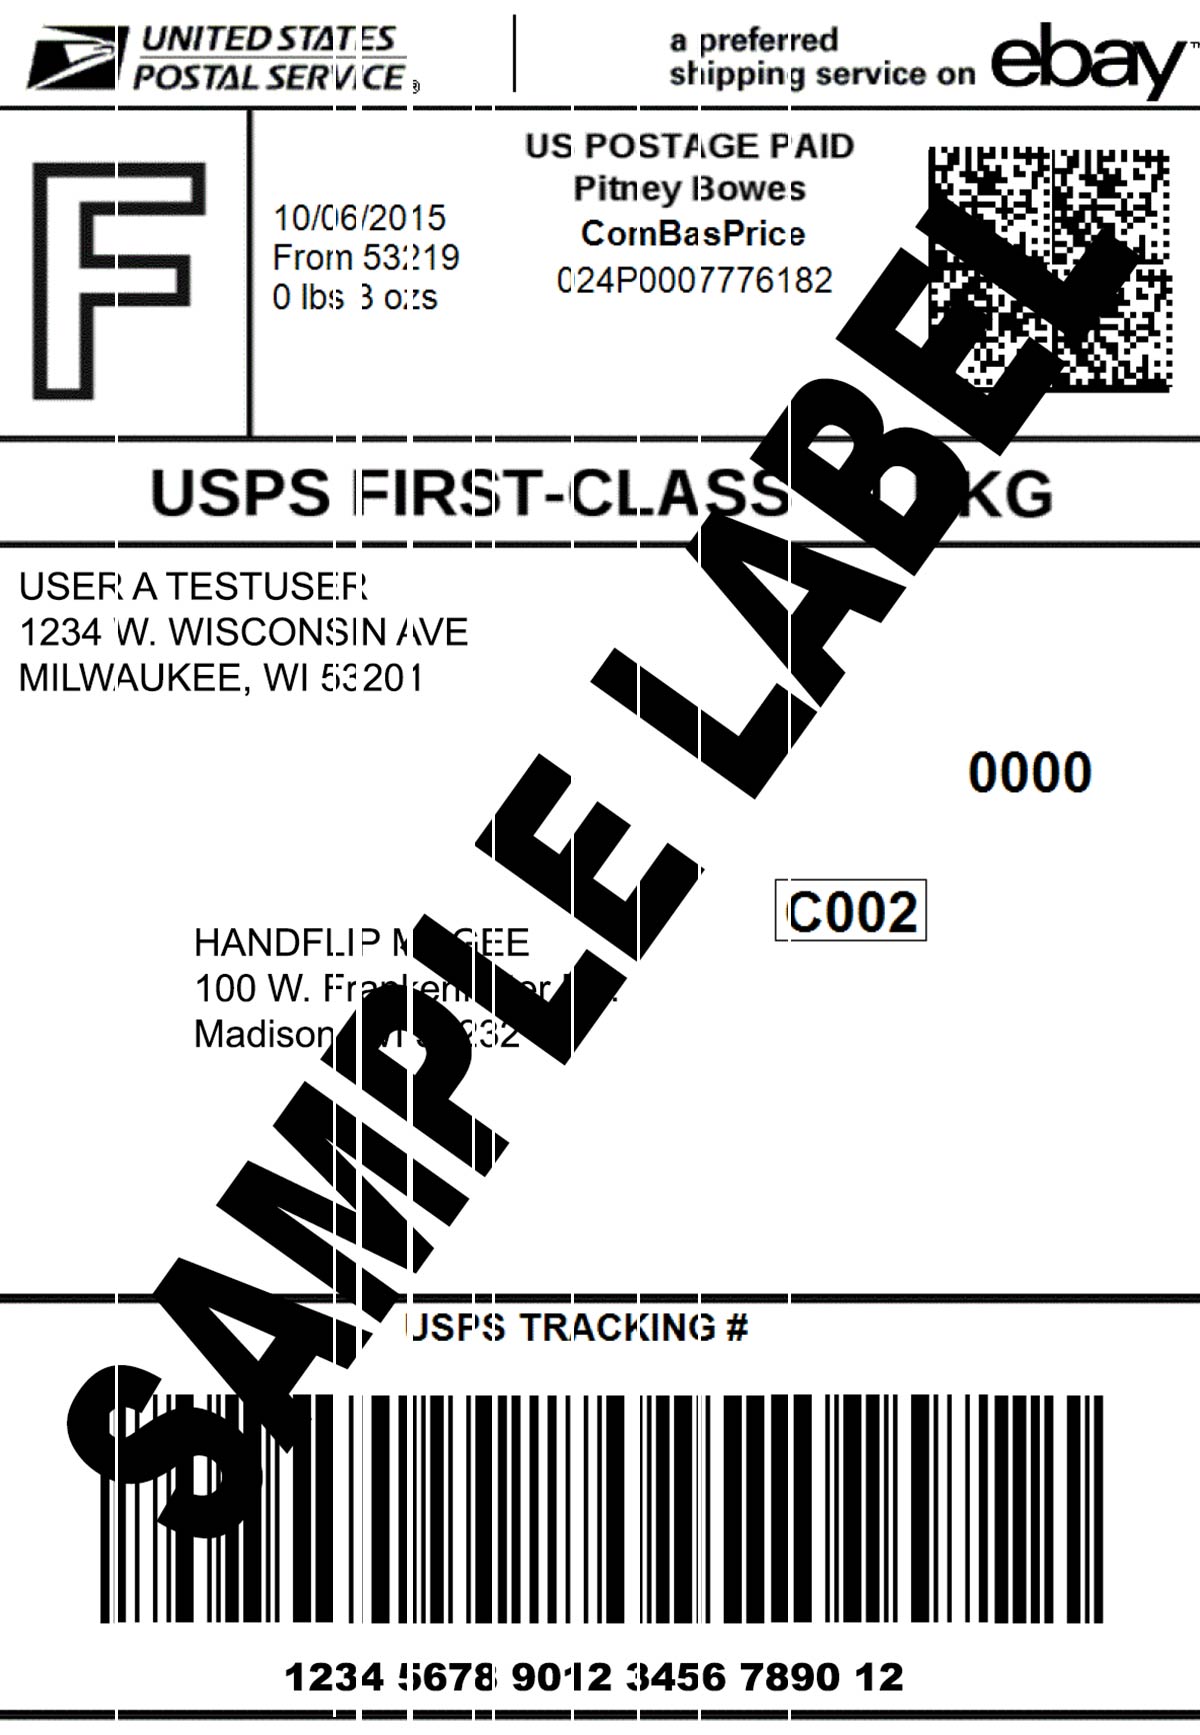 Thermal Printer Test - Shipping Label - Small Vertical Lines.